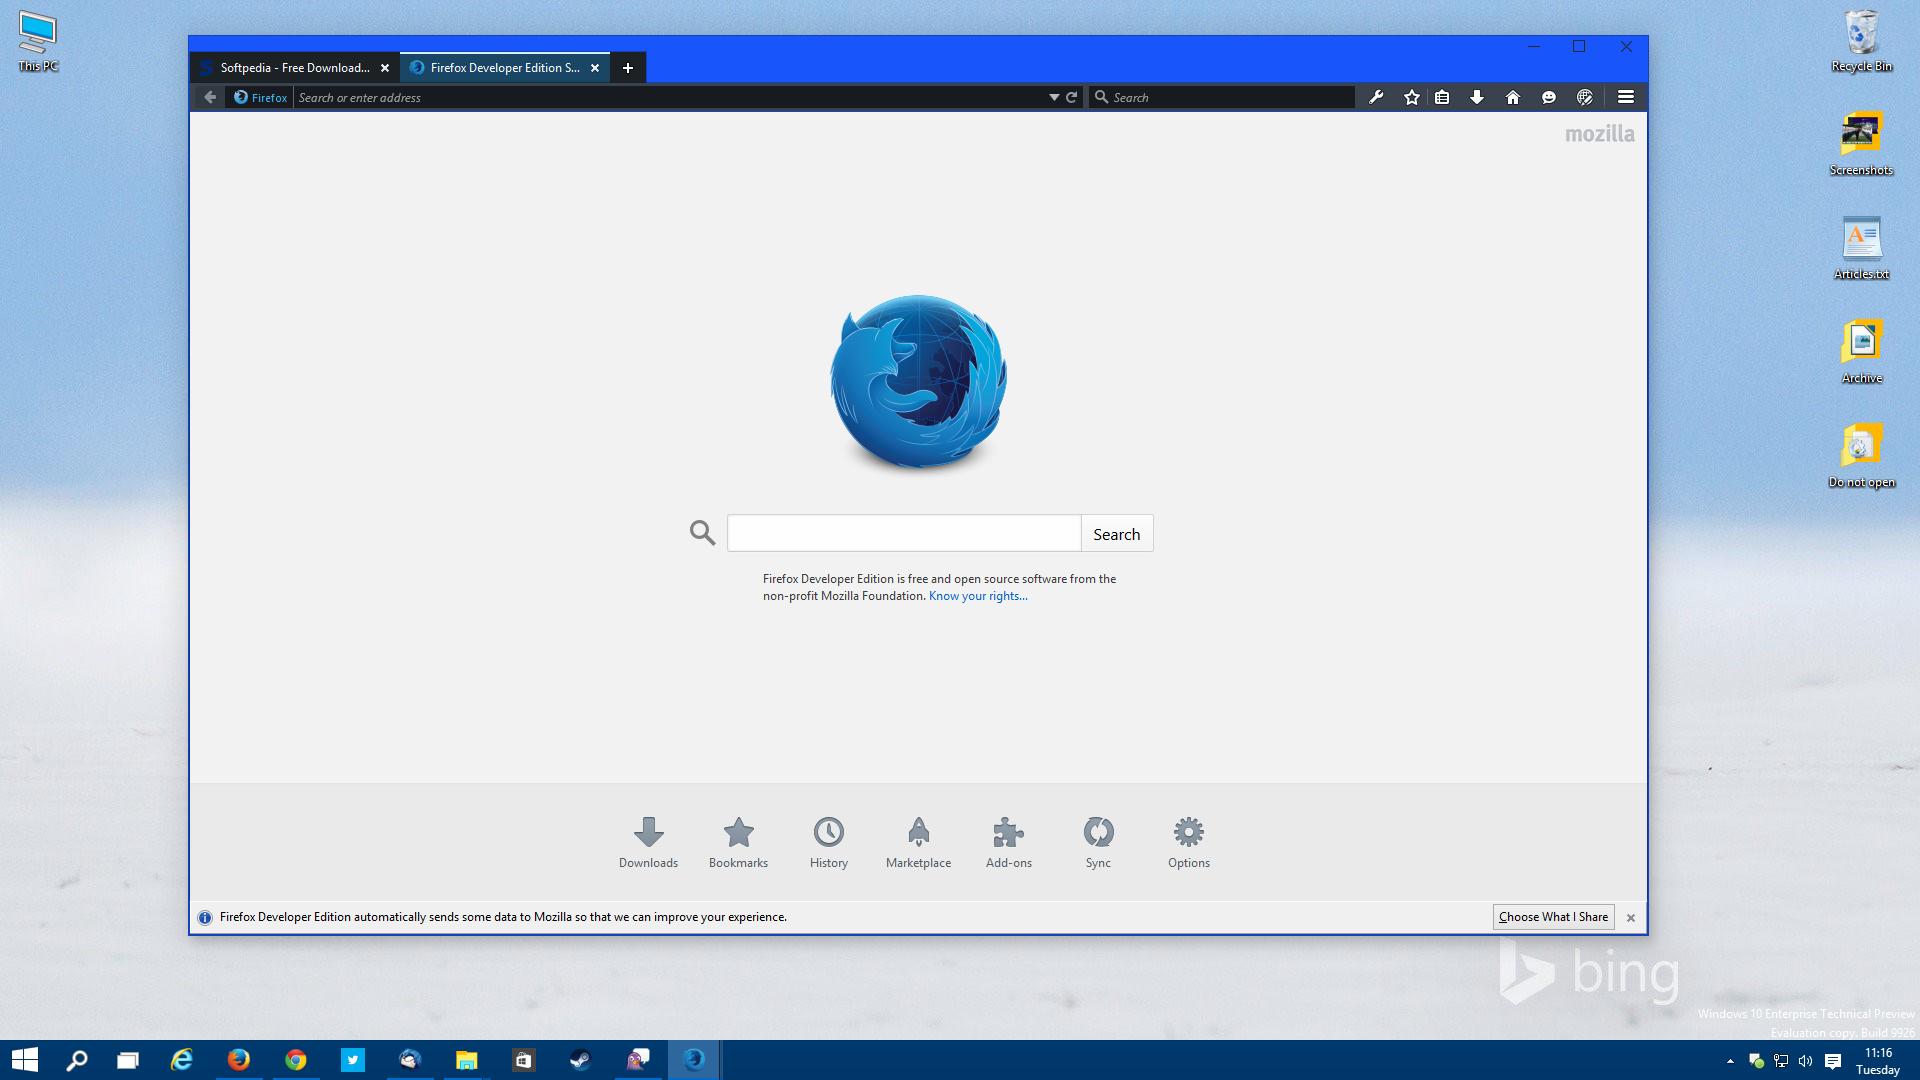 Instalar ccleaner full version 2016 windows 10 - Kitchen ccleaner for windows with built in curricular educacion